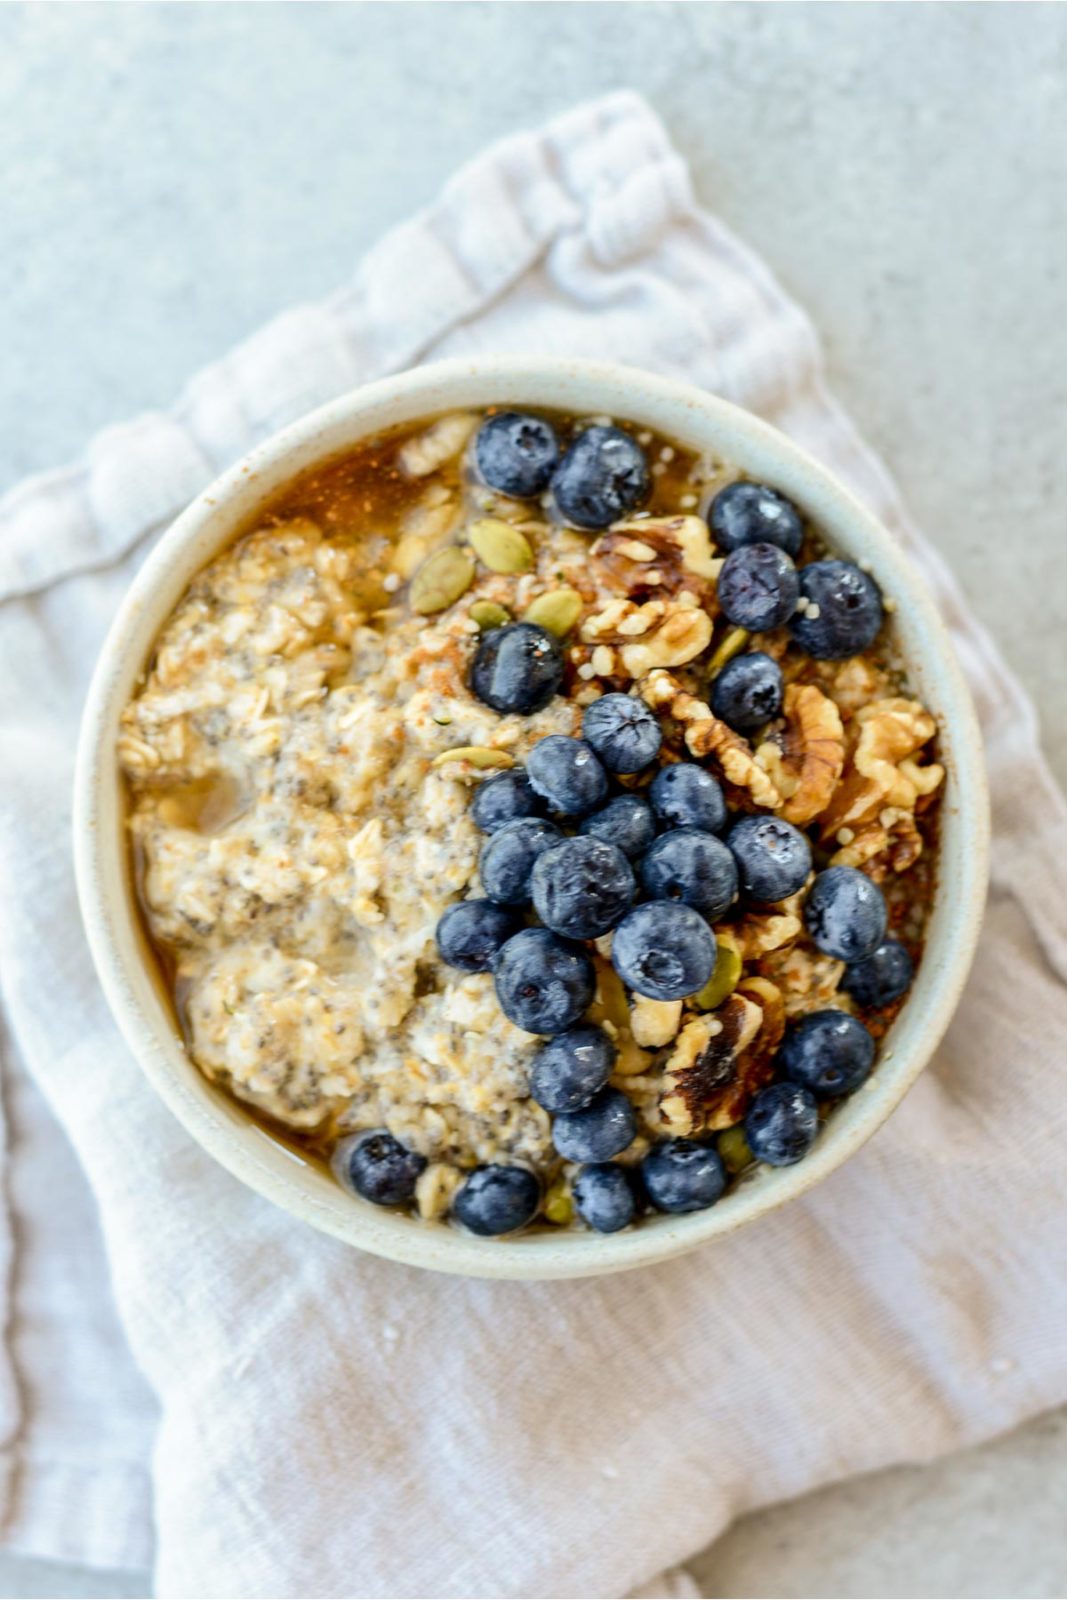 Is Oatmeal Good For You? - The Living Well